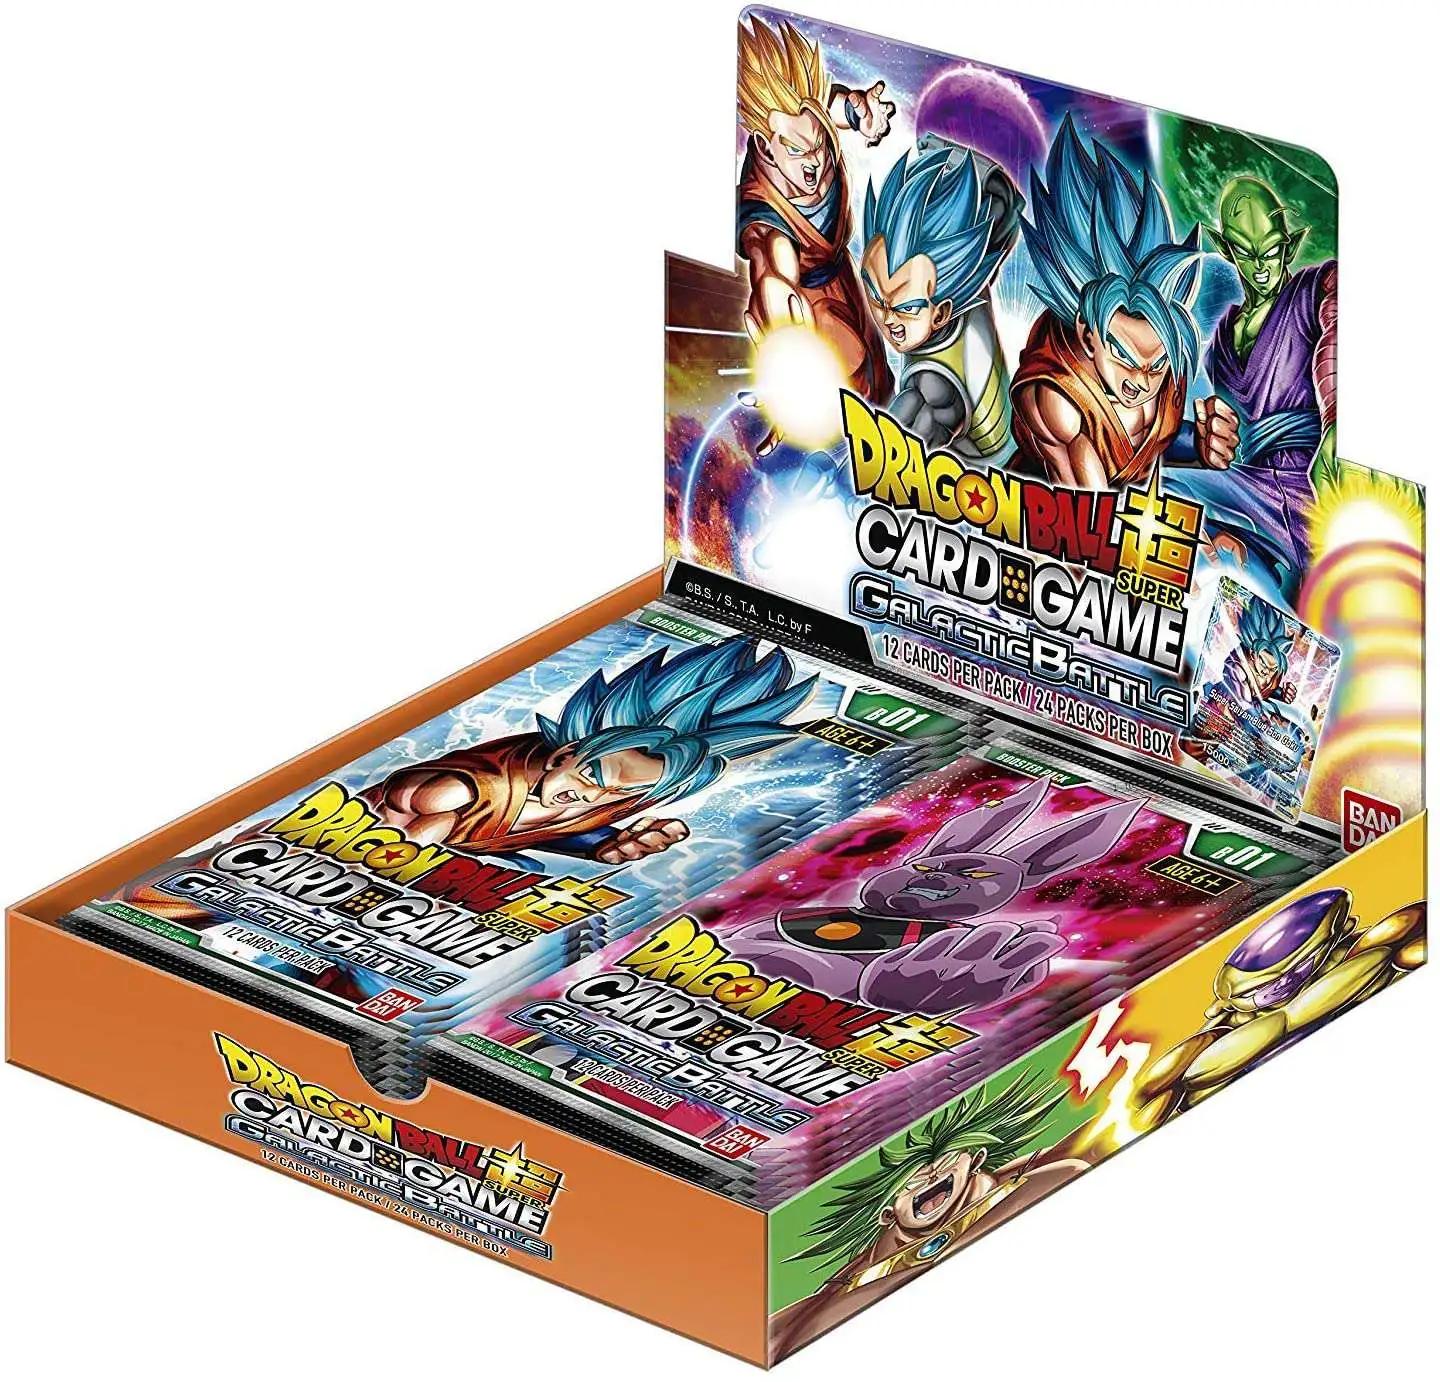 Card Game Gift Box Dragon Ball Super contains 6 packs of booster cards 